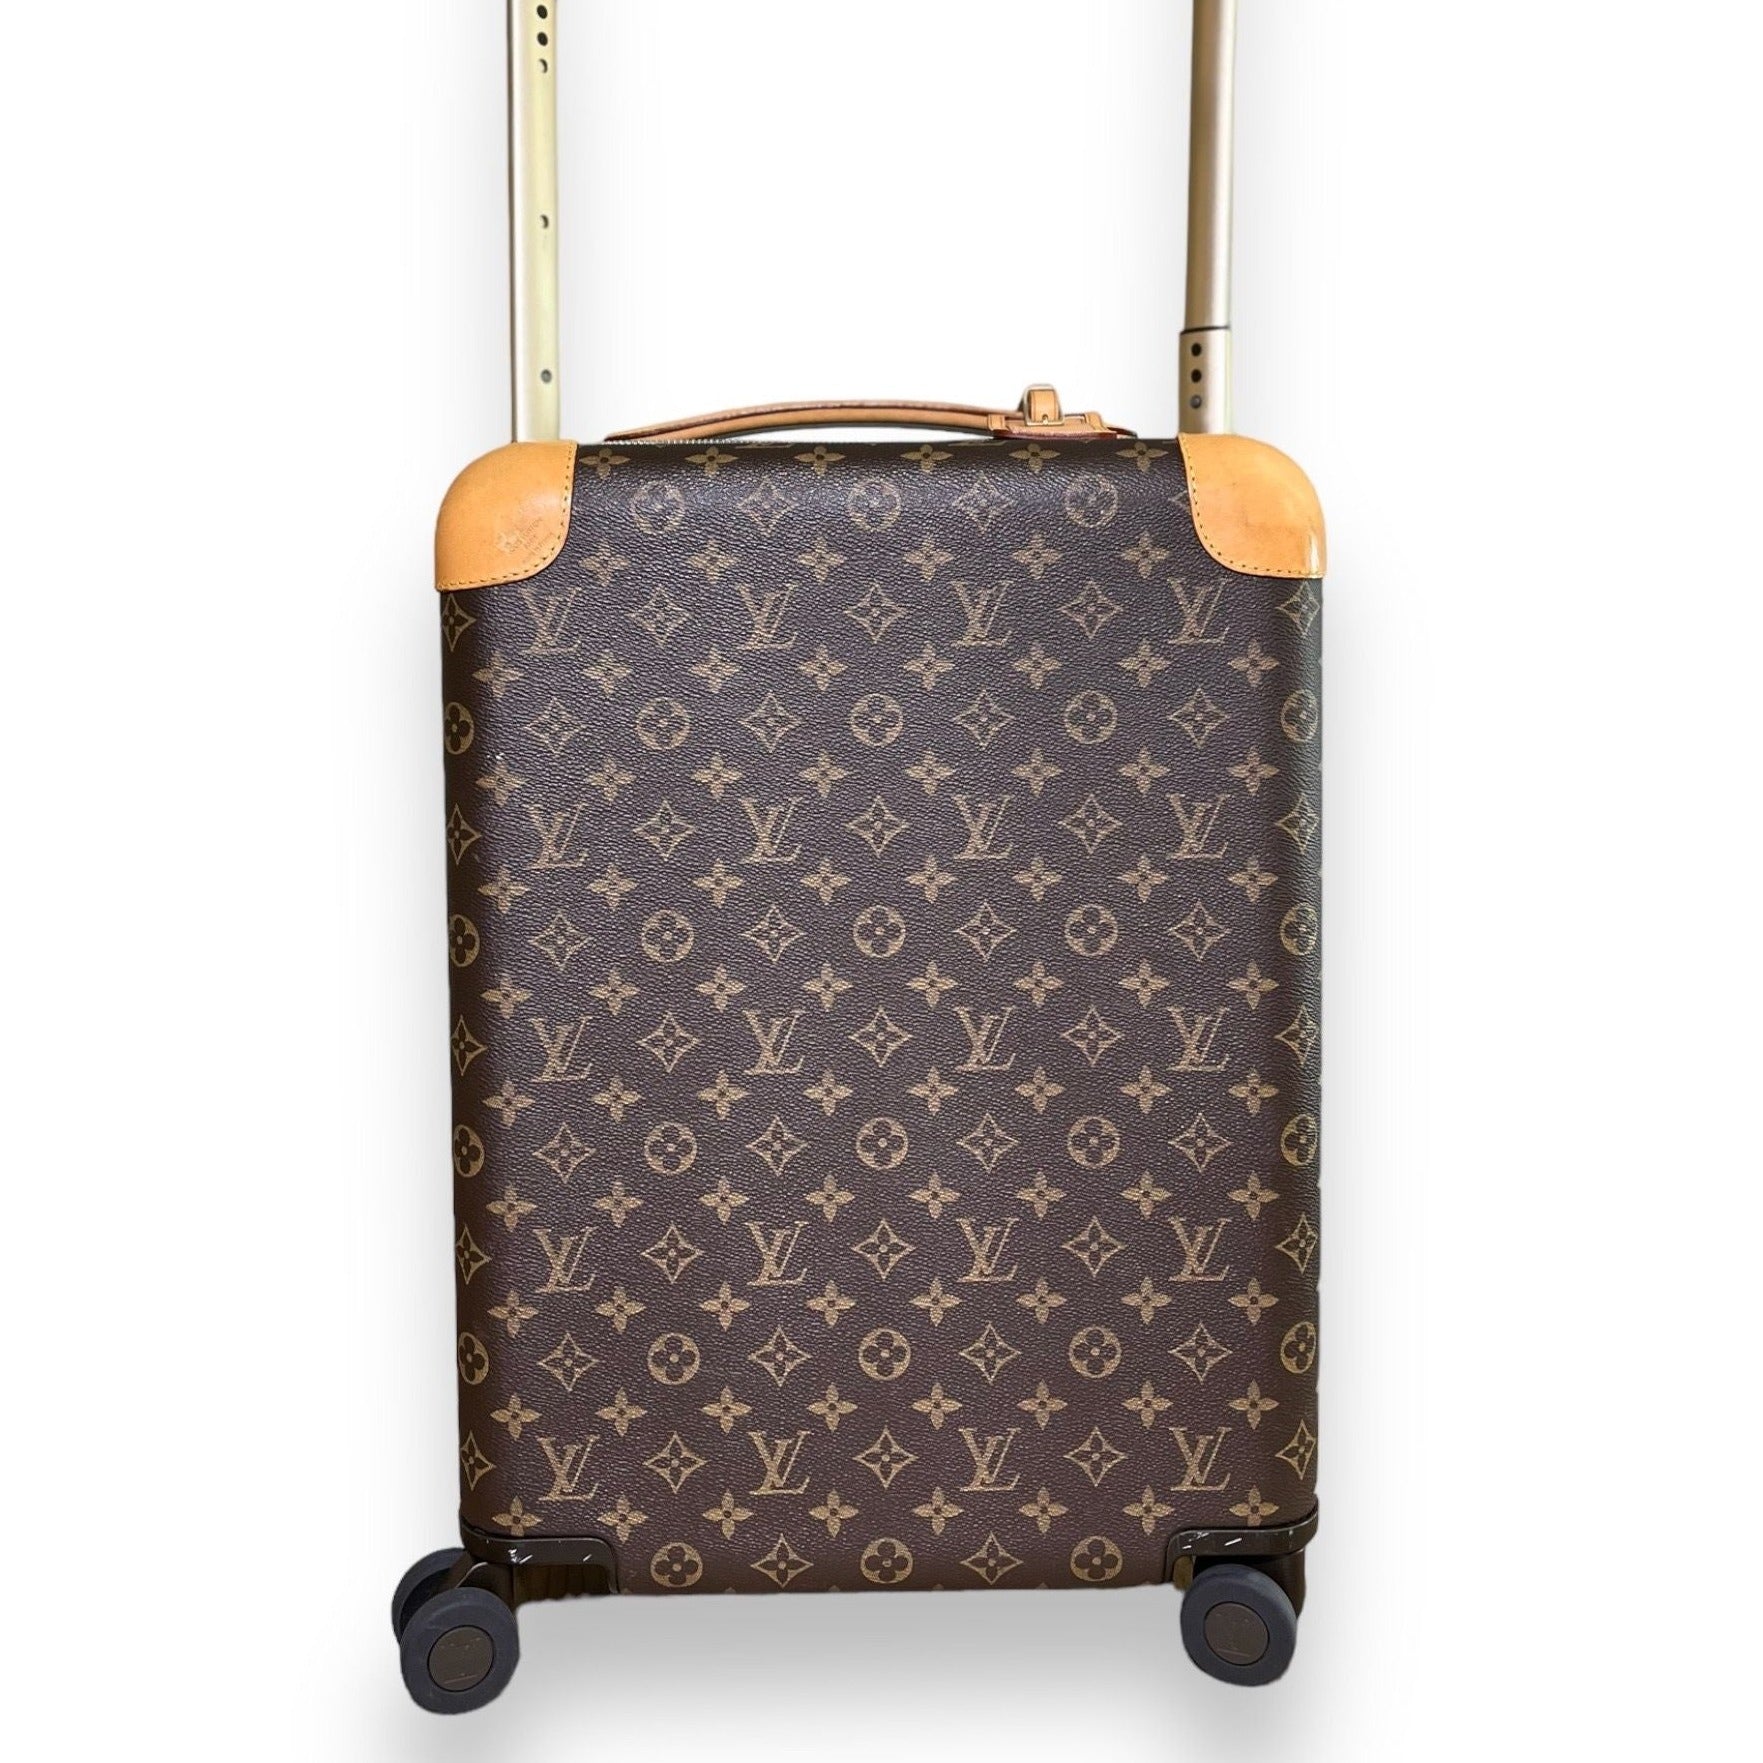 Louis Vuitton rolling carry on luggage